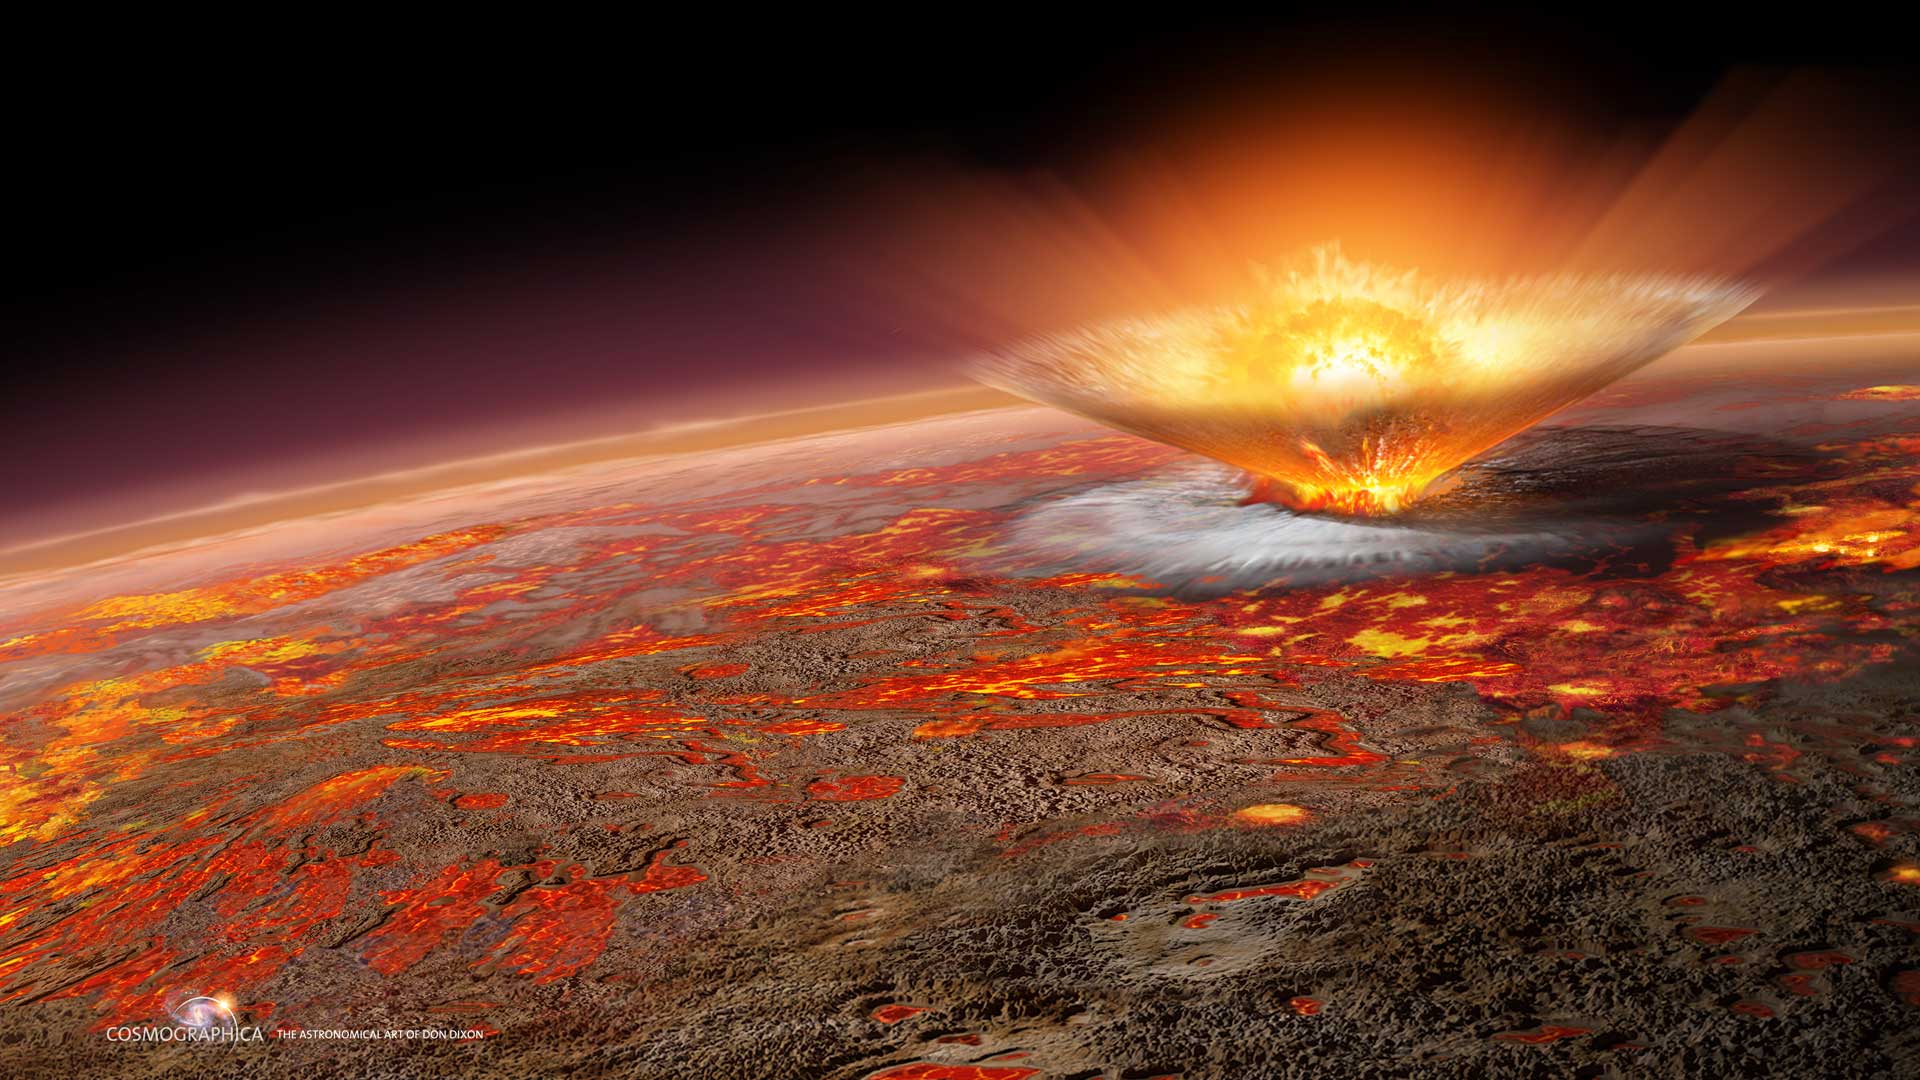 Scientists Reveal New Vision Of Earth Four Billion Years Ago